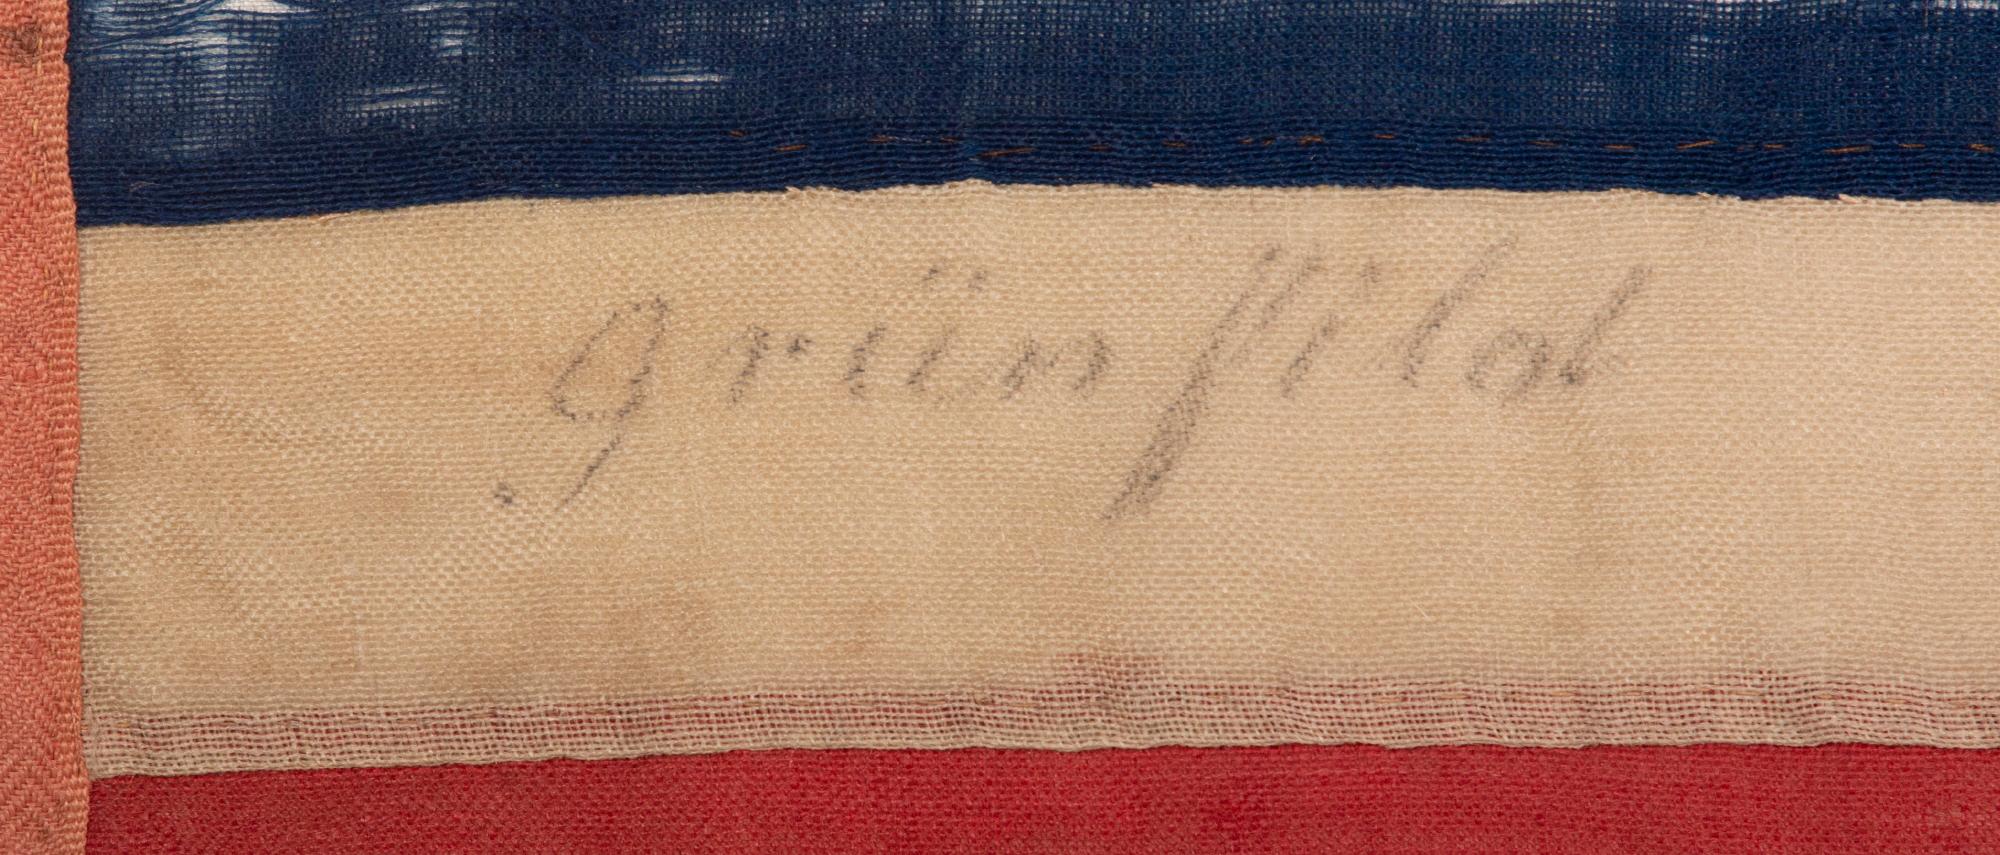 united states flag in 1861